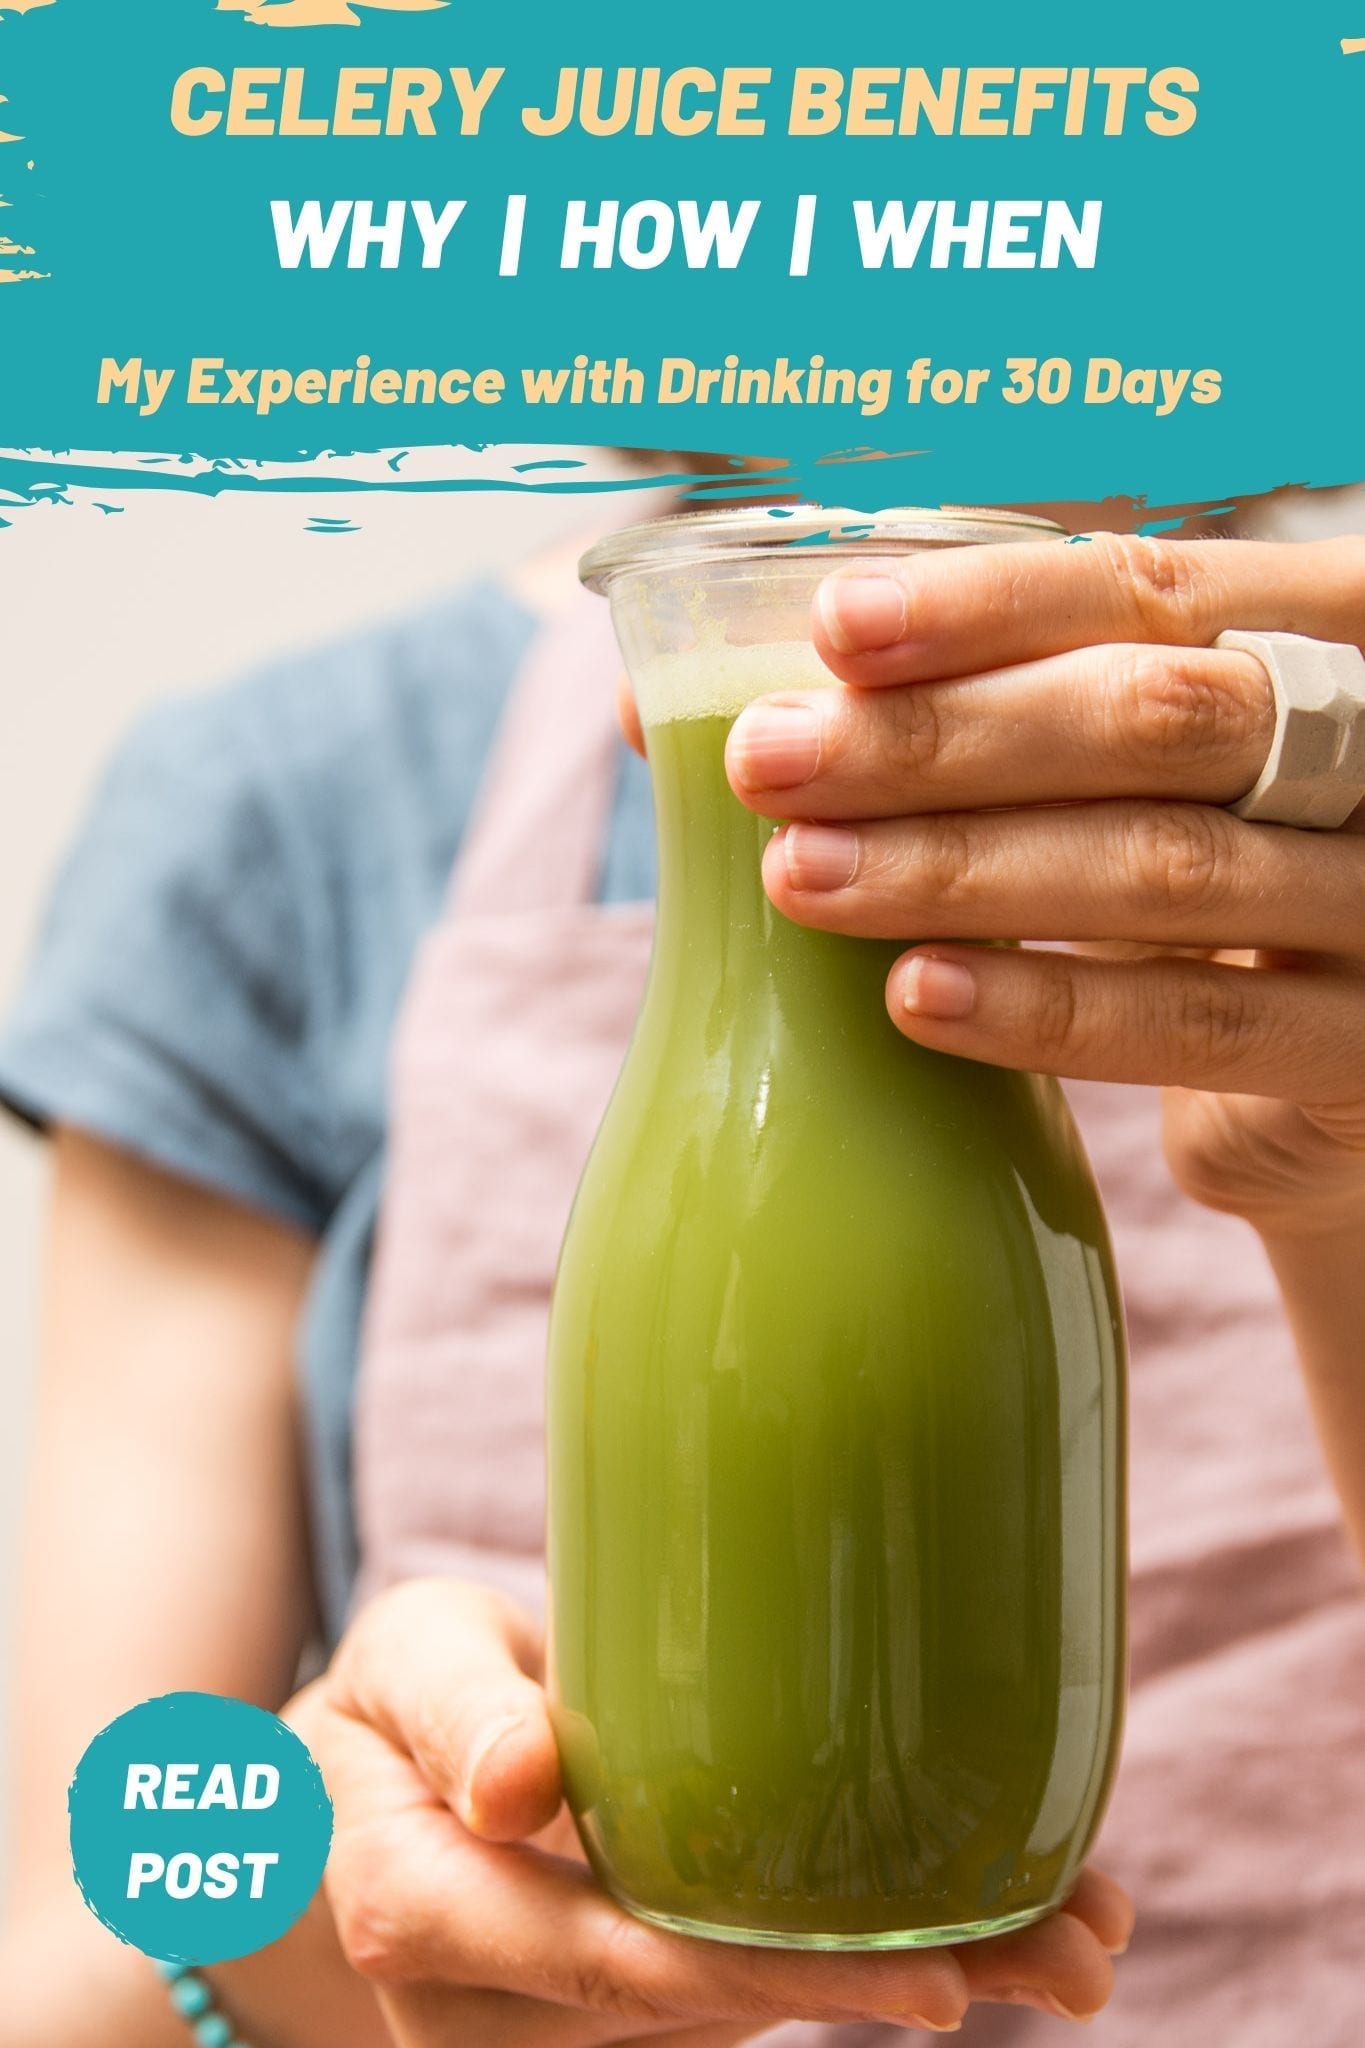 Celery juice benefits, my experience after 30 days and the correct way to drink it. 